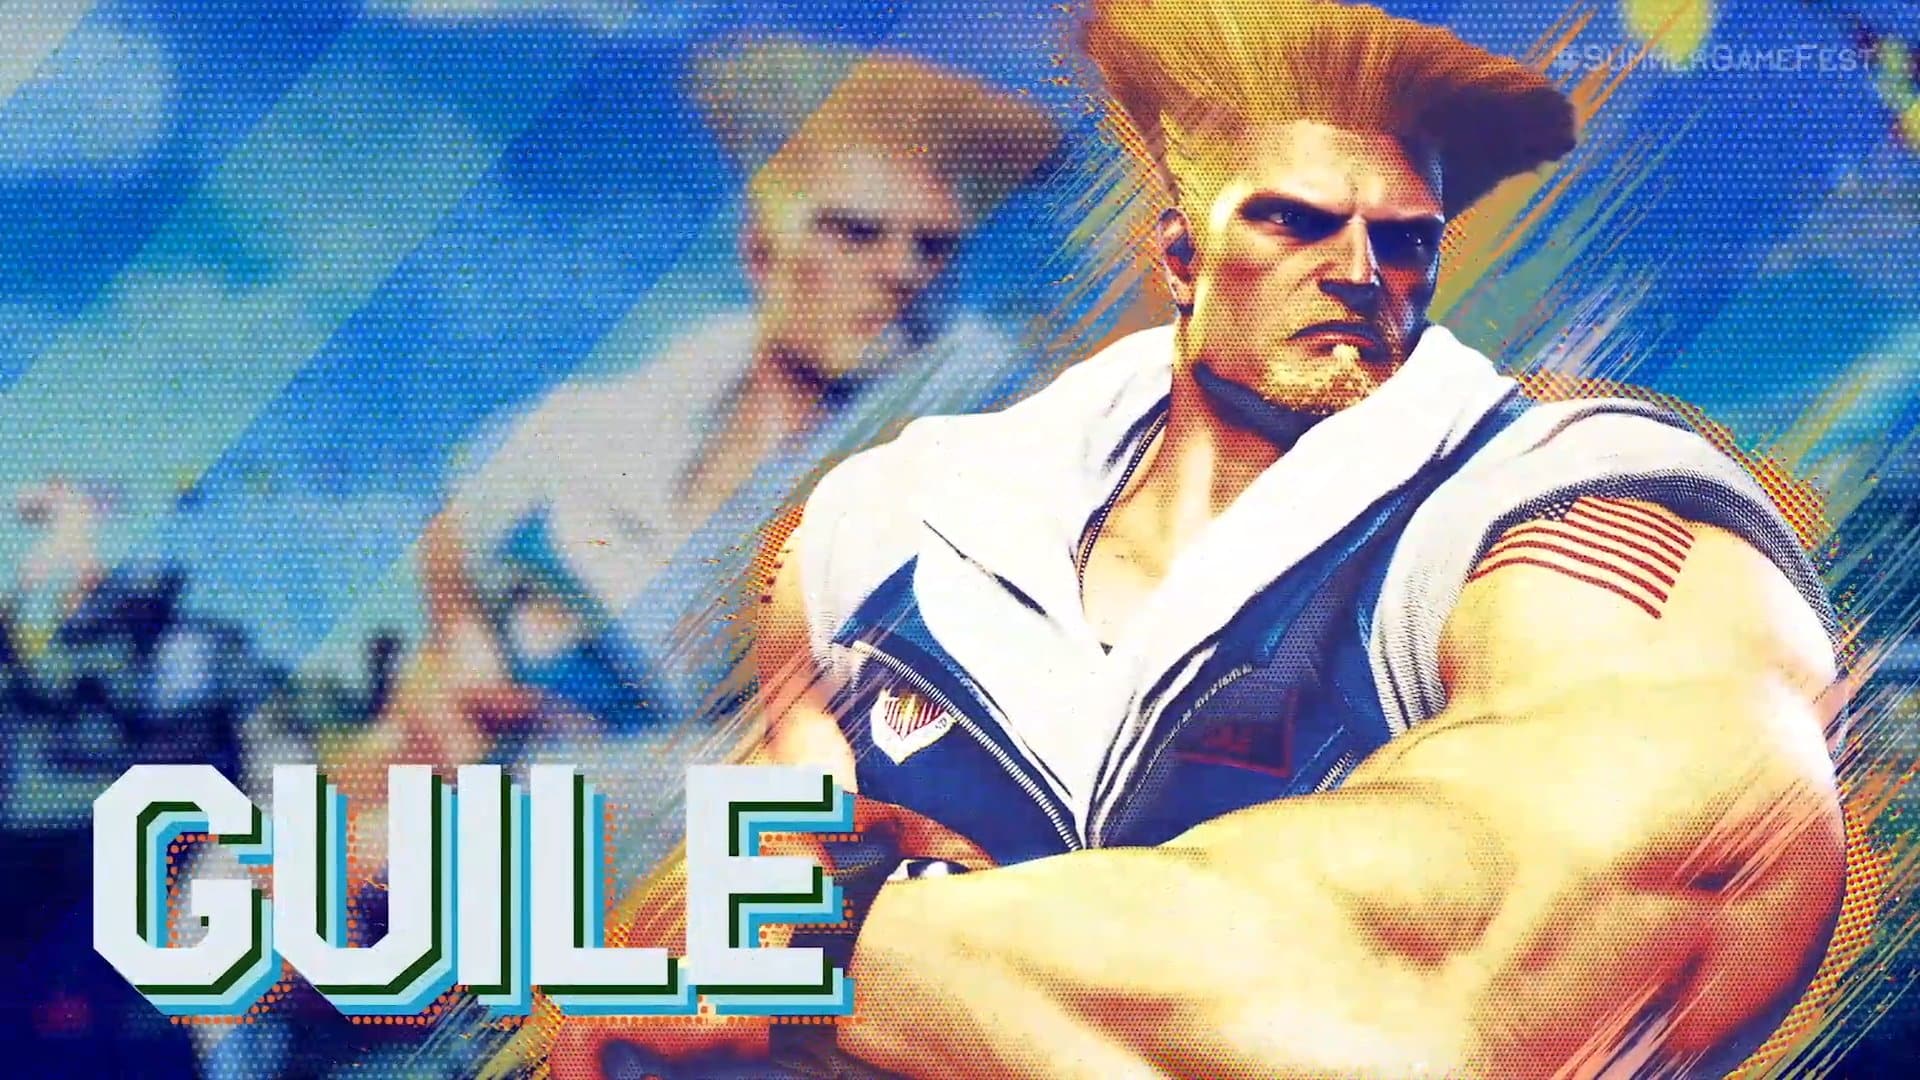 Street Fighter 6 - Guile Gameplay Trailer : r/Fighters